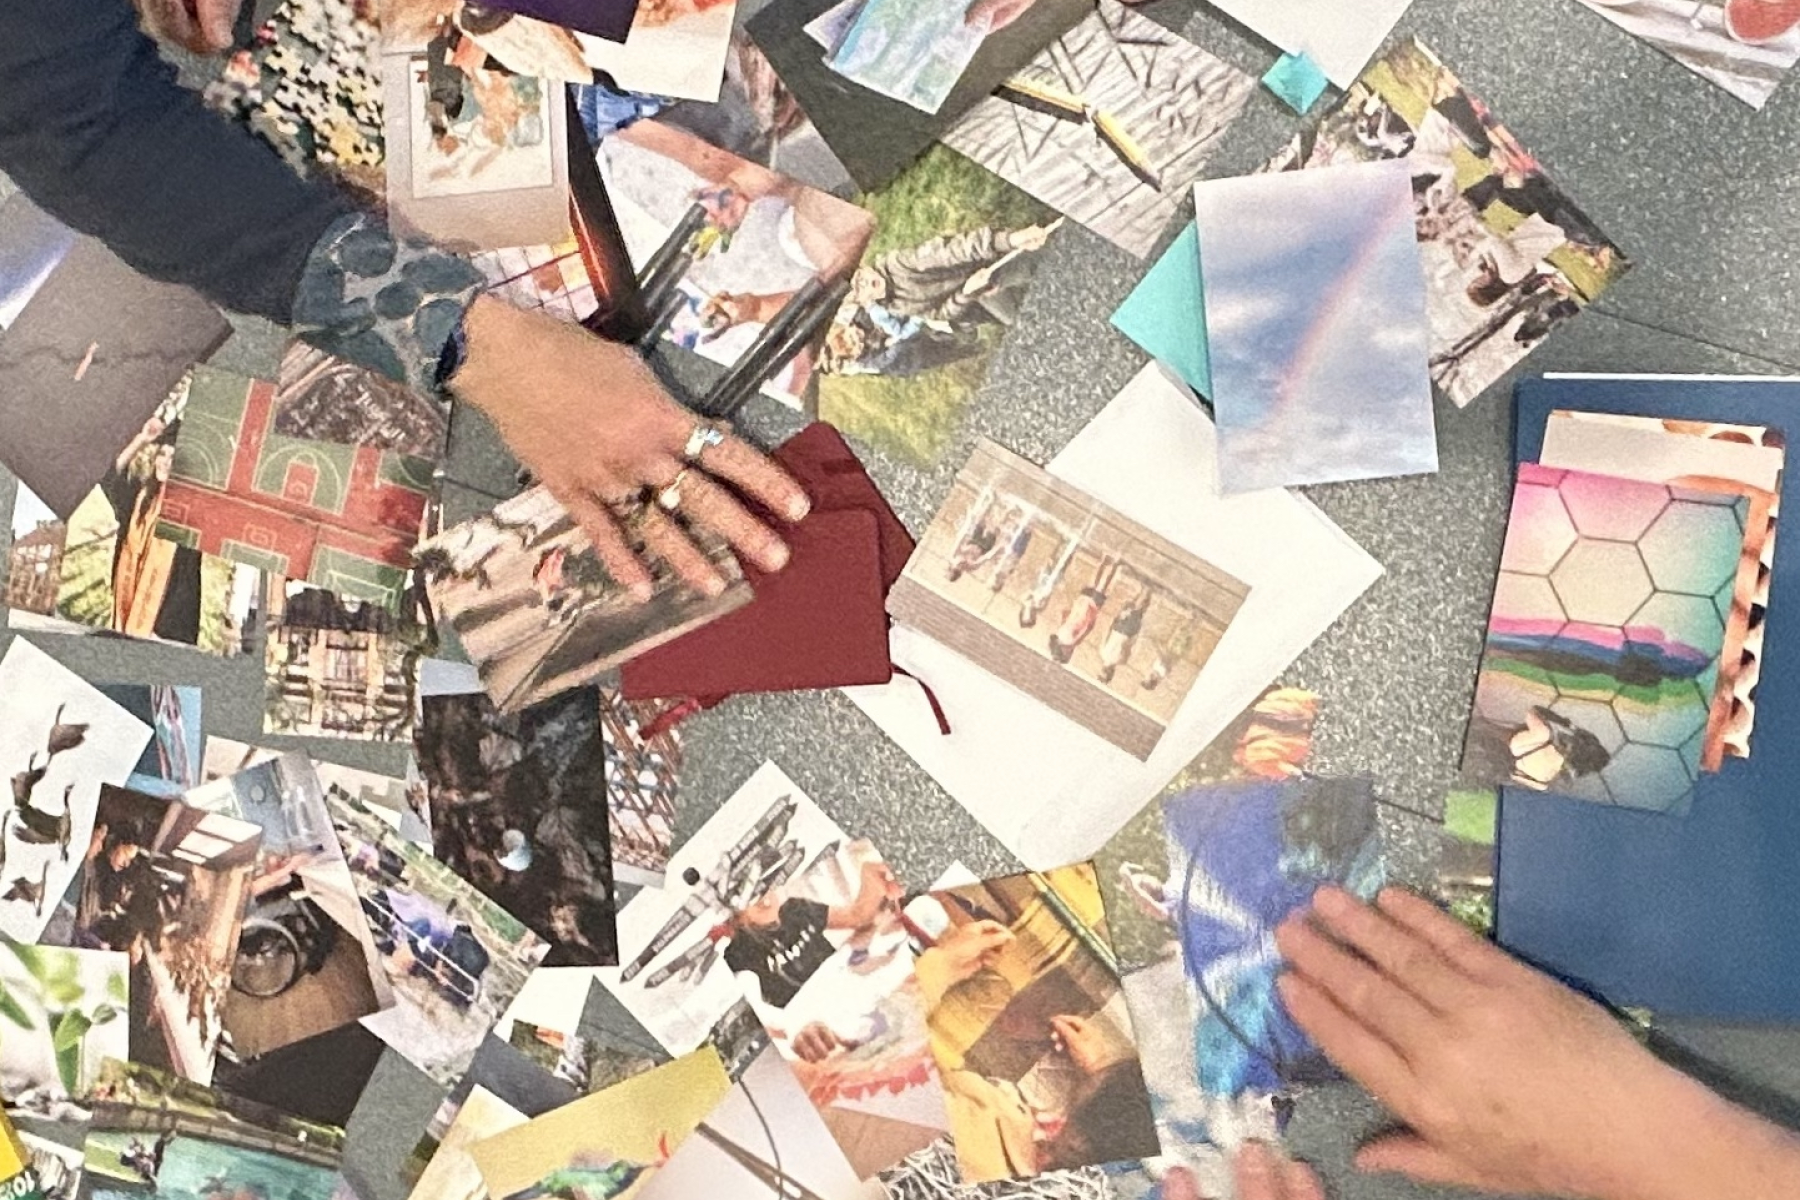 What is learning photo cards spread out on a table with people's hands sorting through them